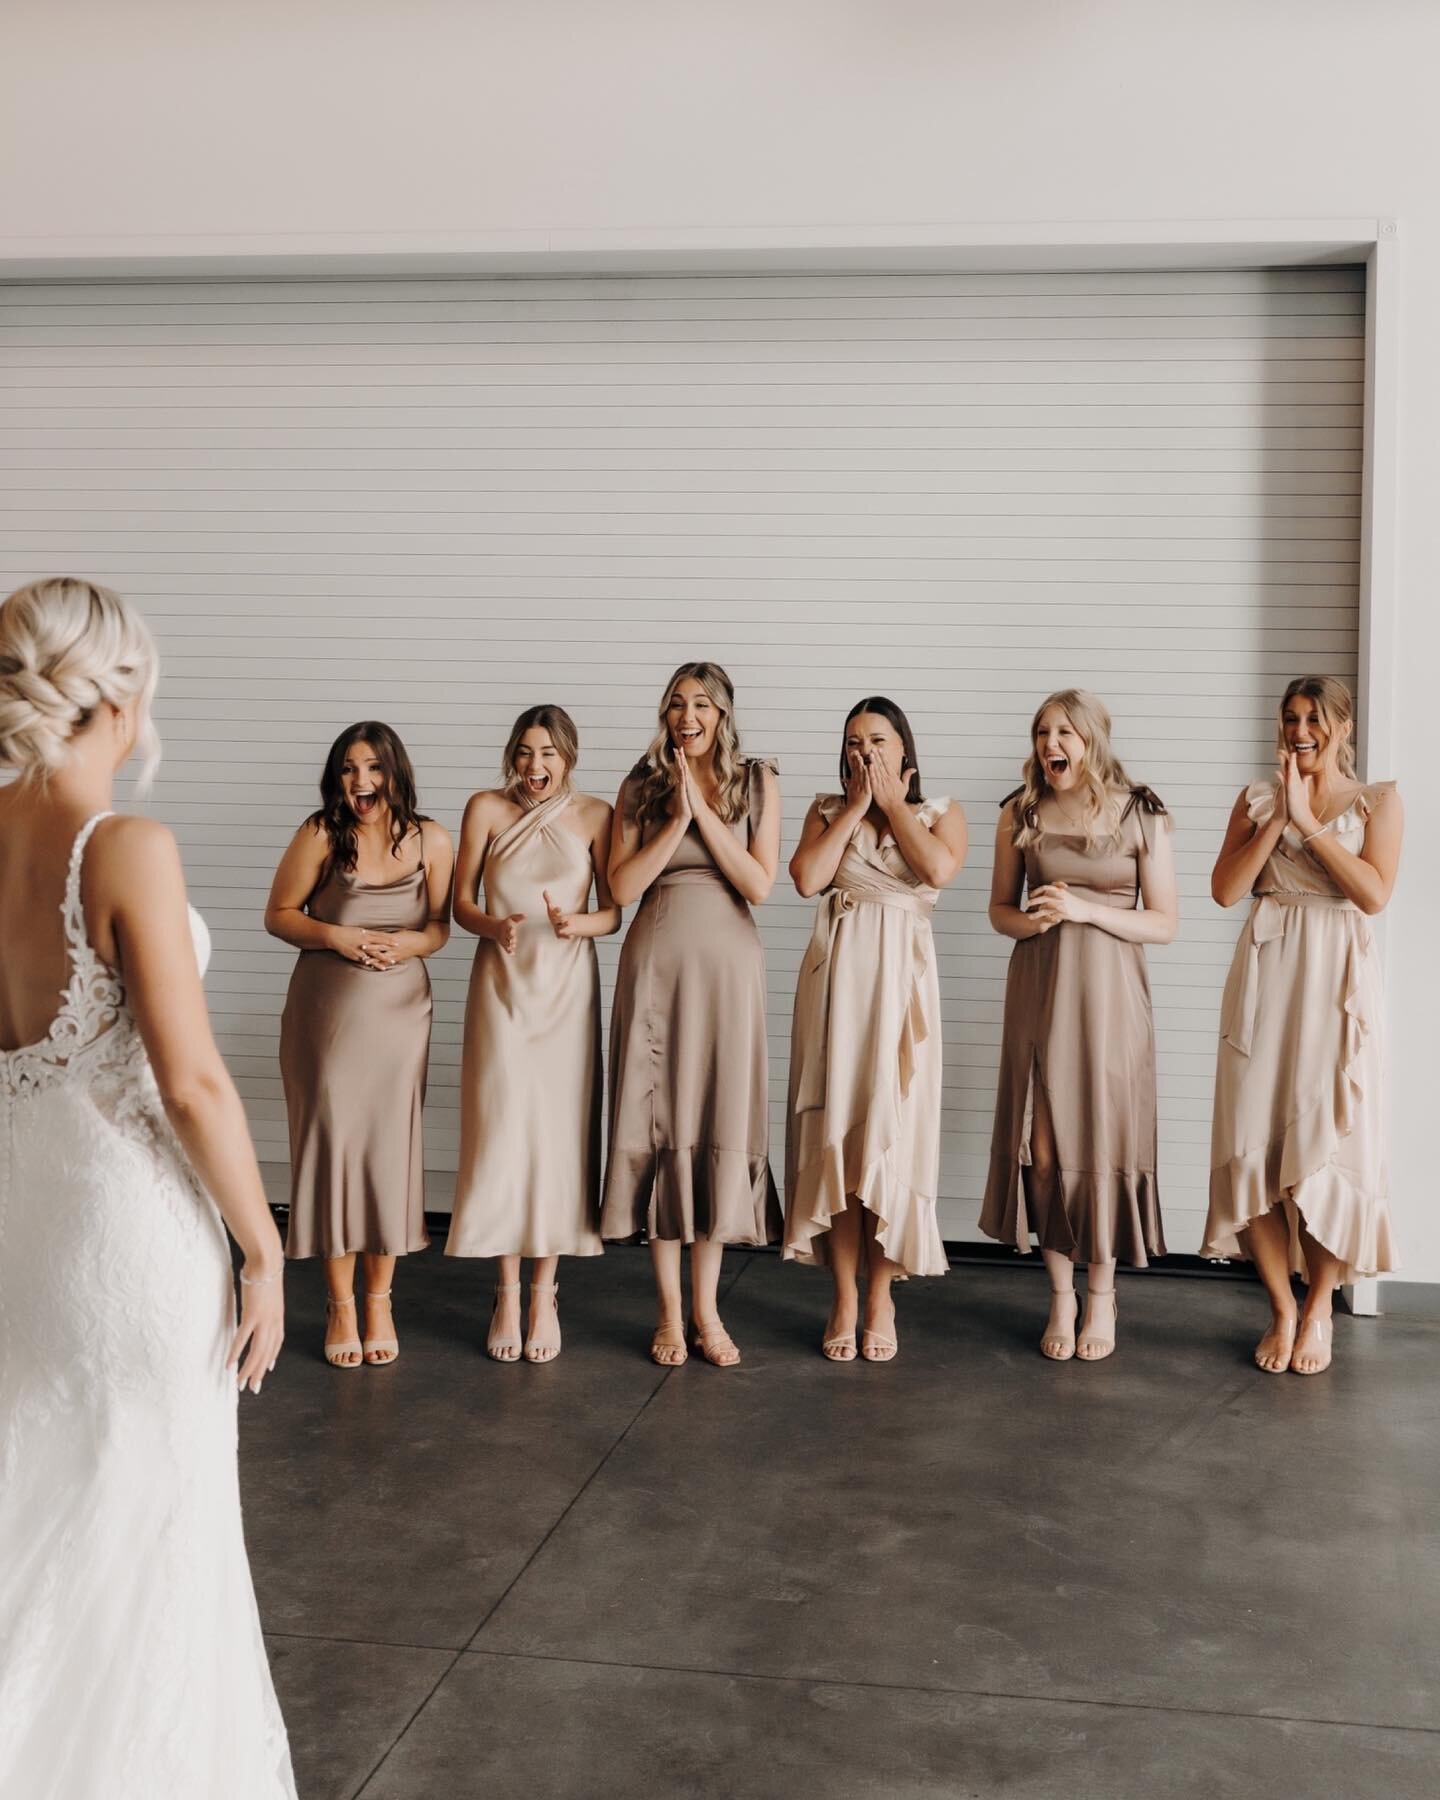 Moments of connection 🤍

That fleeting moment when you see your best friend, daughter, son, granddaughter, parent, loved one on their/your wedding day is so surreal and special. 

Hannah &amp; Brenton had both planned first looks and a few unplanned